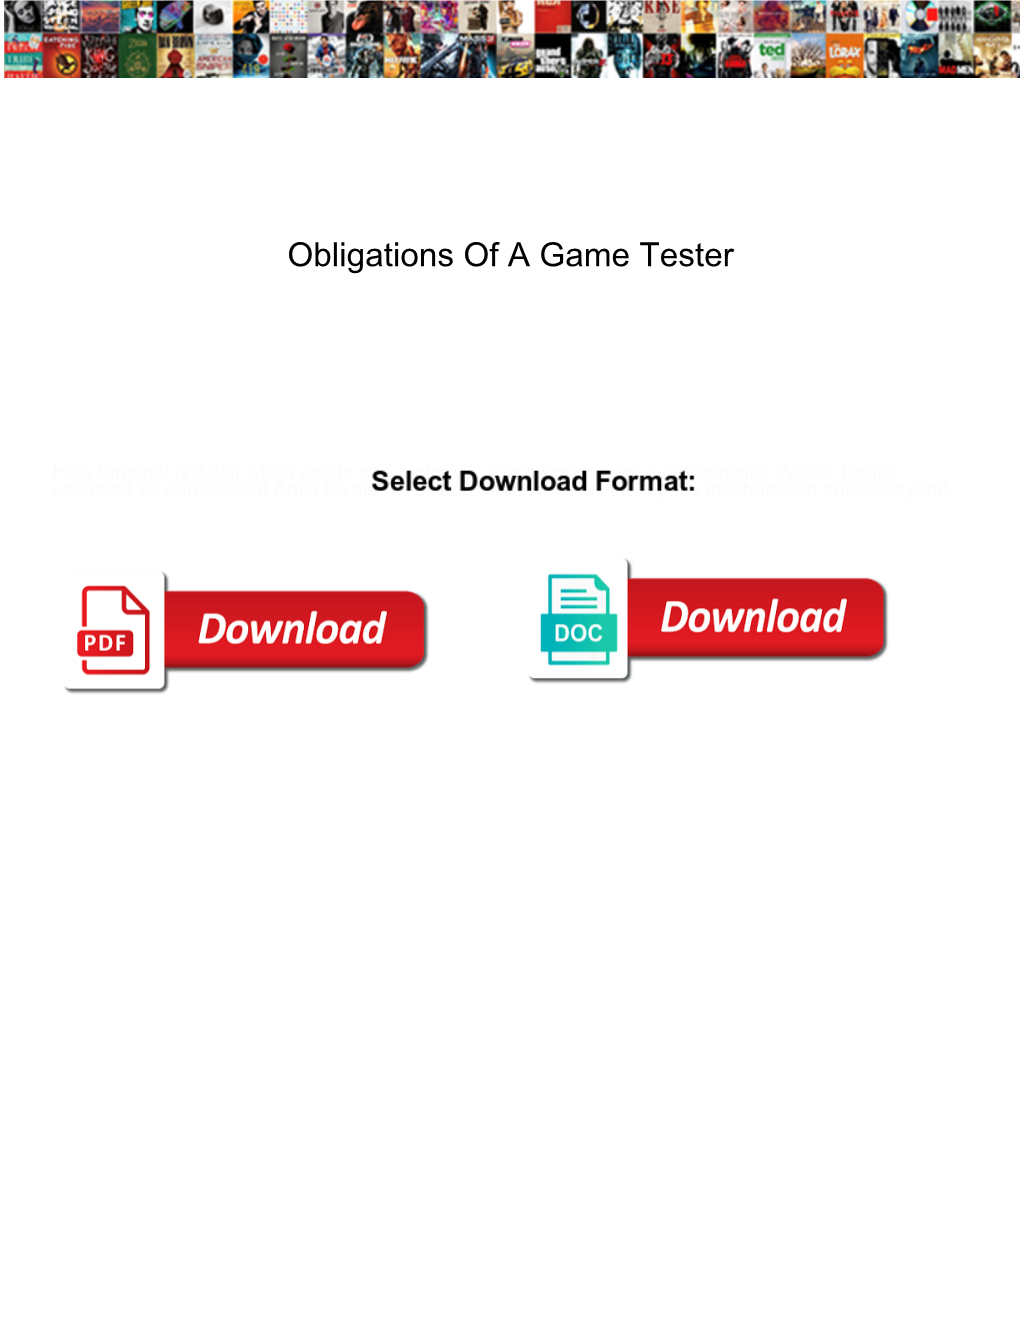 Obligations of a Game Tester